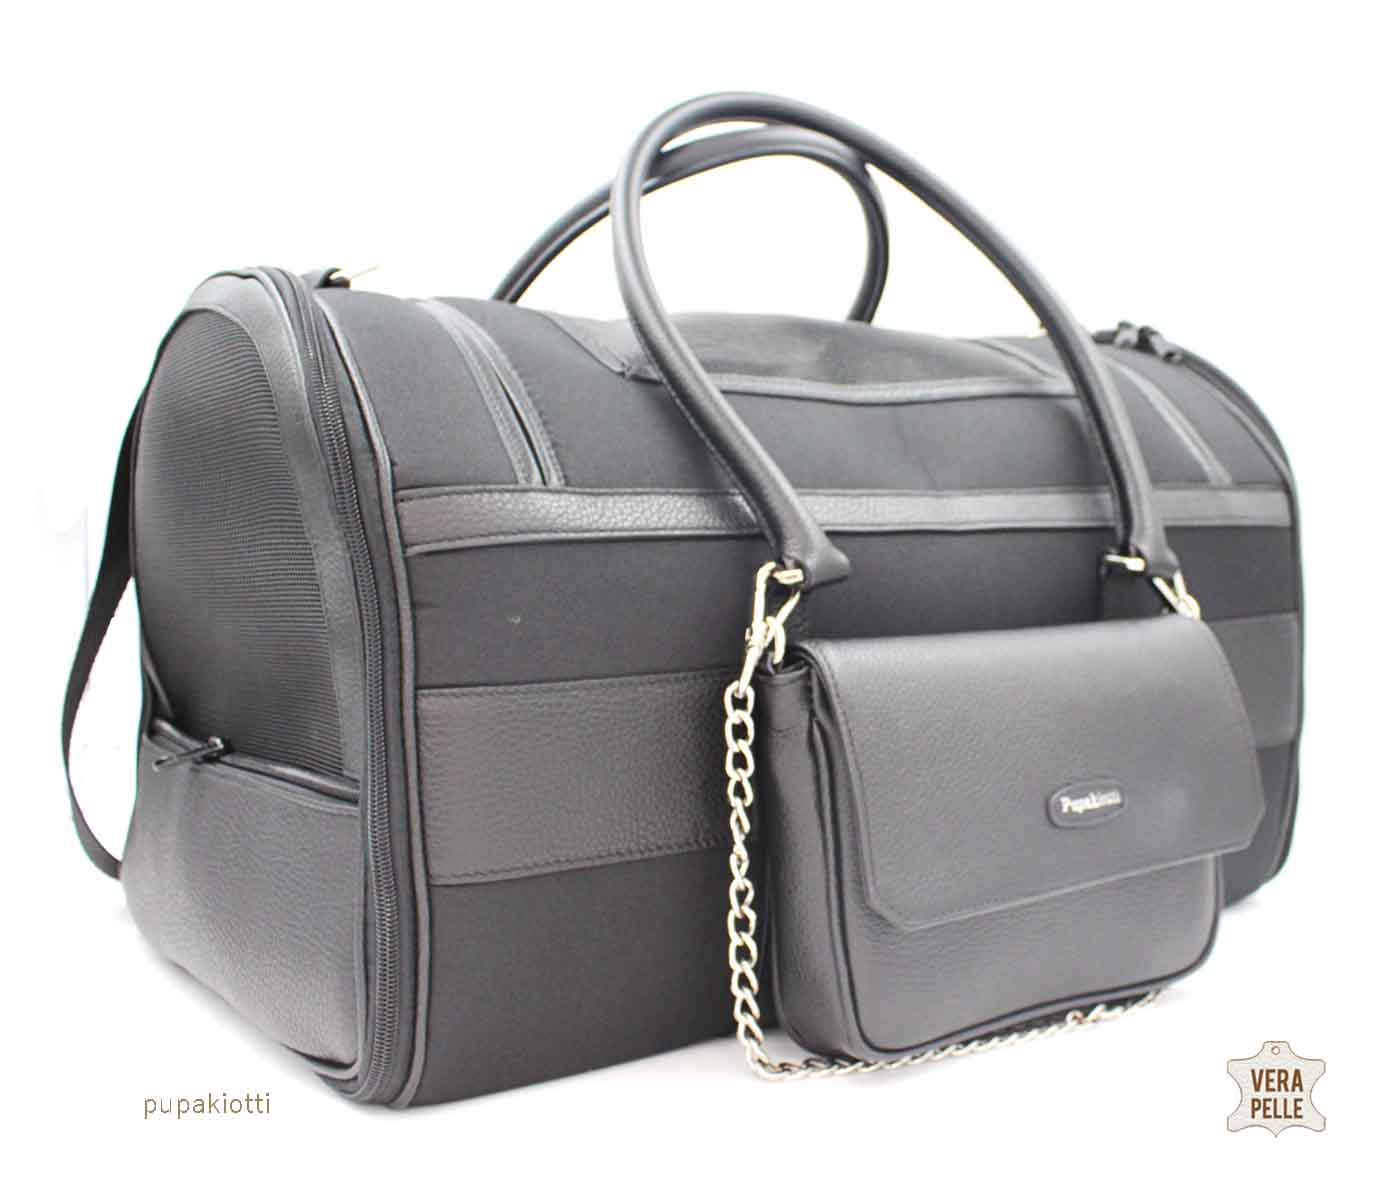 Sky. Carrying Bag in Genuine Leather and Technic waterproof fabric